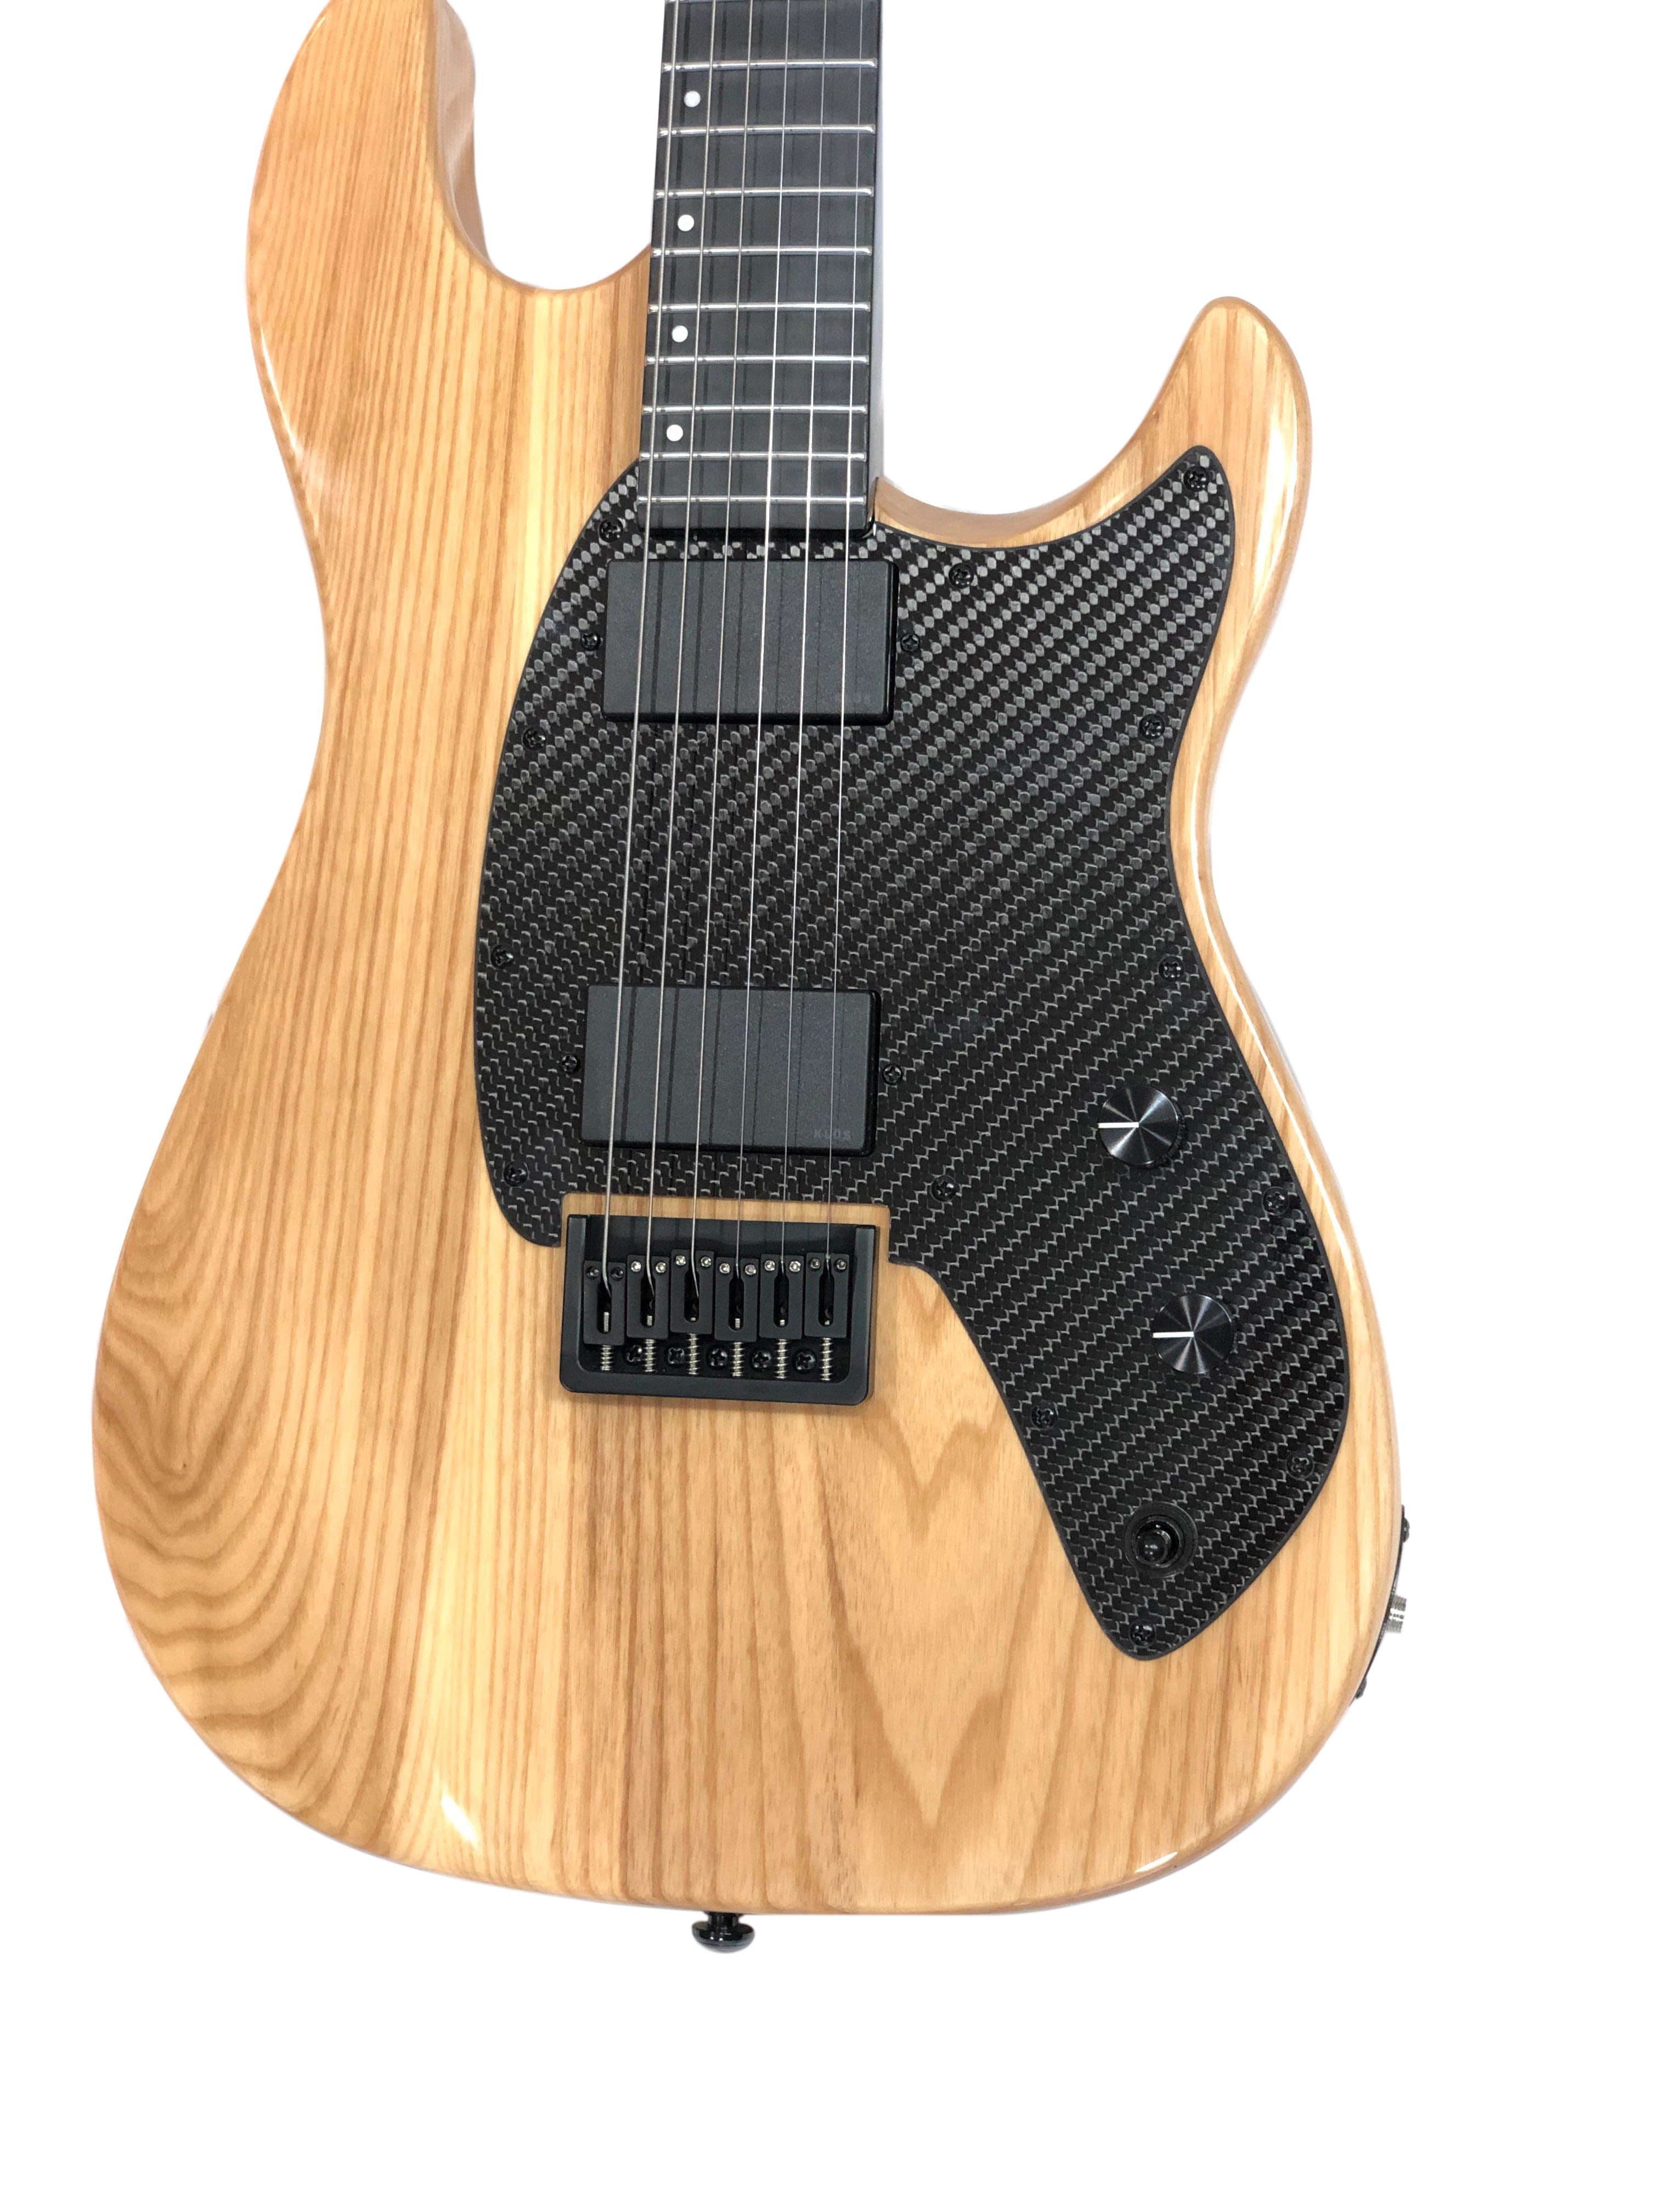 Natural Wood Electric Guitar on a white background (close up)